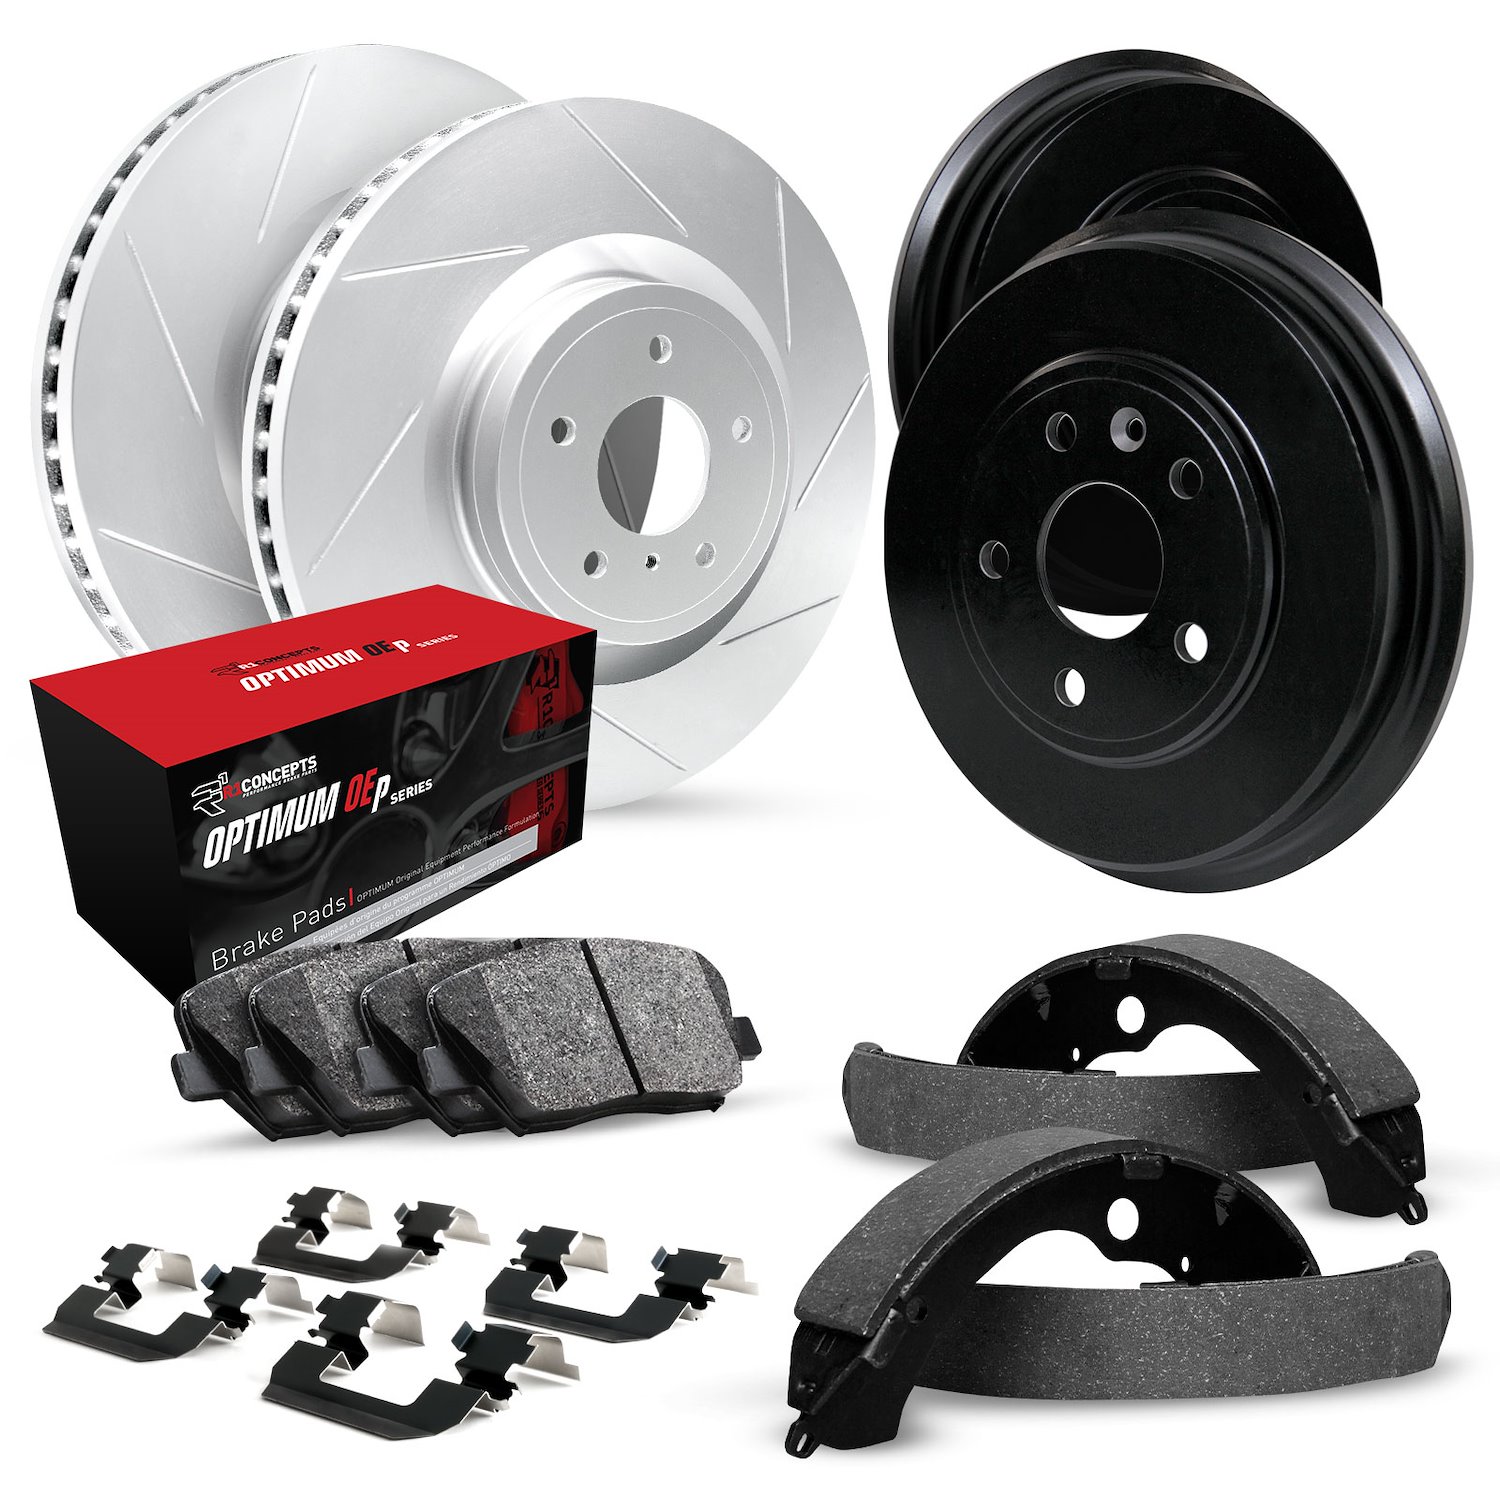 GEO-Carbon Slotted Brake Rotor & Drum Set w/Optimum OE Pads, Shoes, & Hardware, 1990-1997 Acura/Honda, Position: Front & Rear